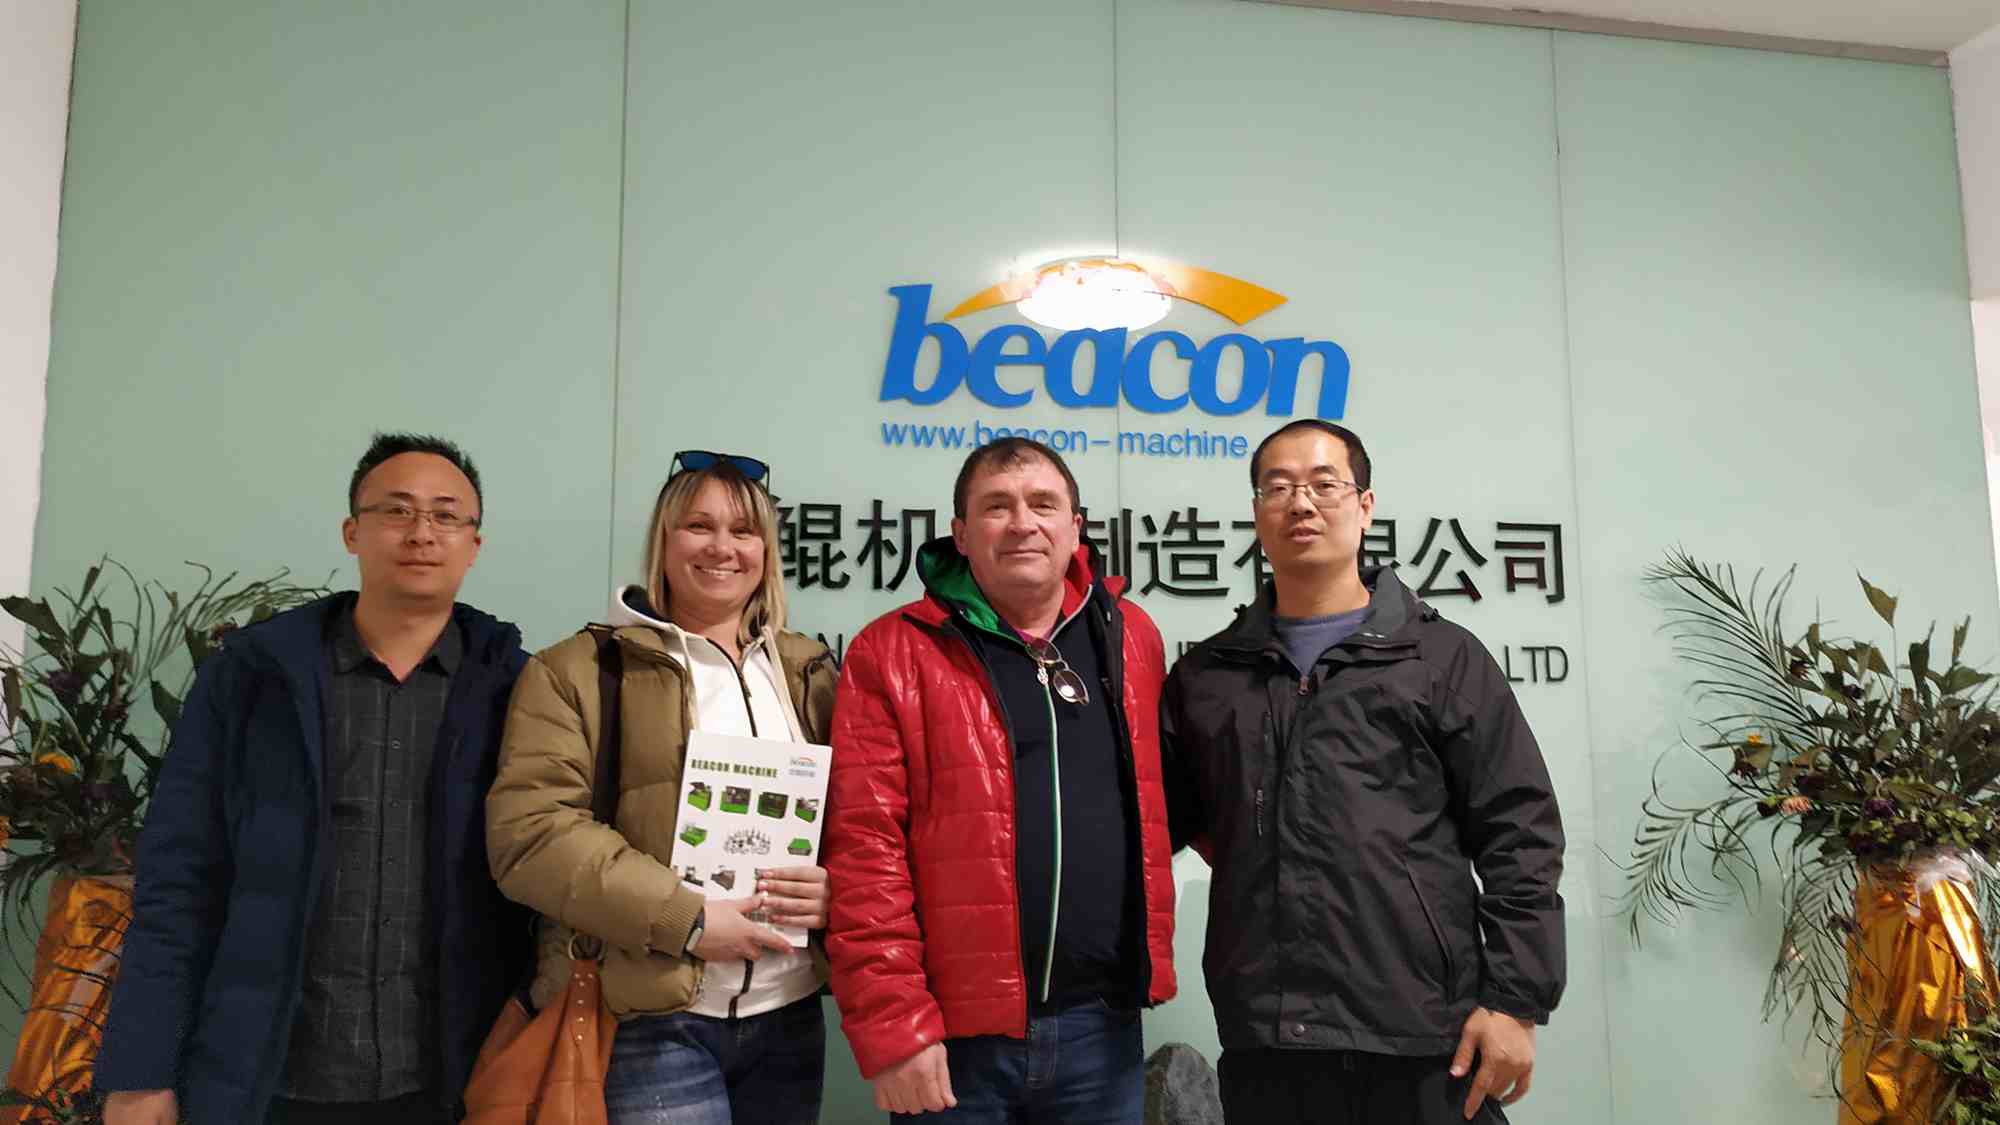 The customer from Ukraine to visit our factory